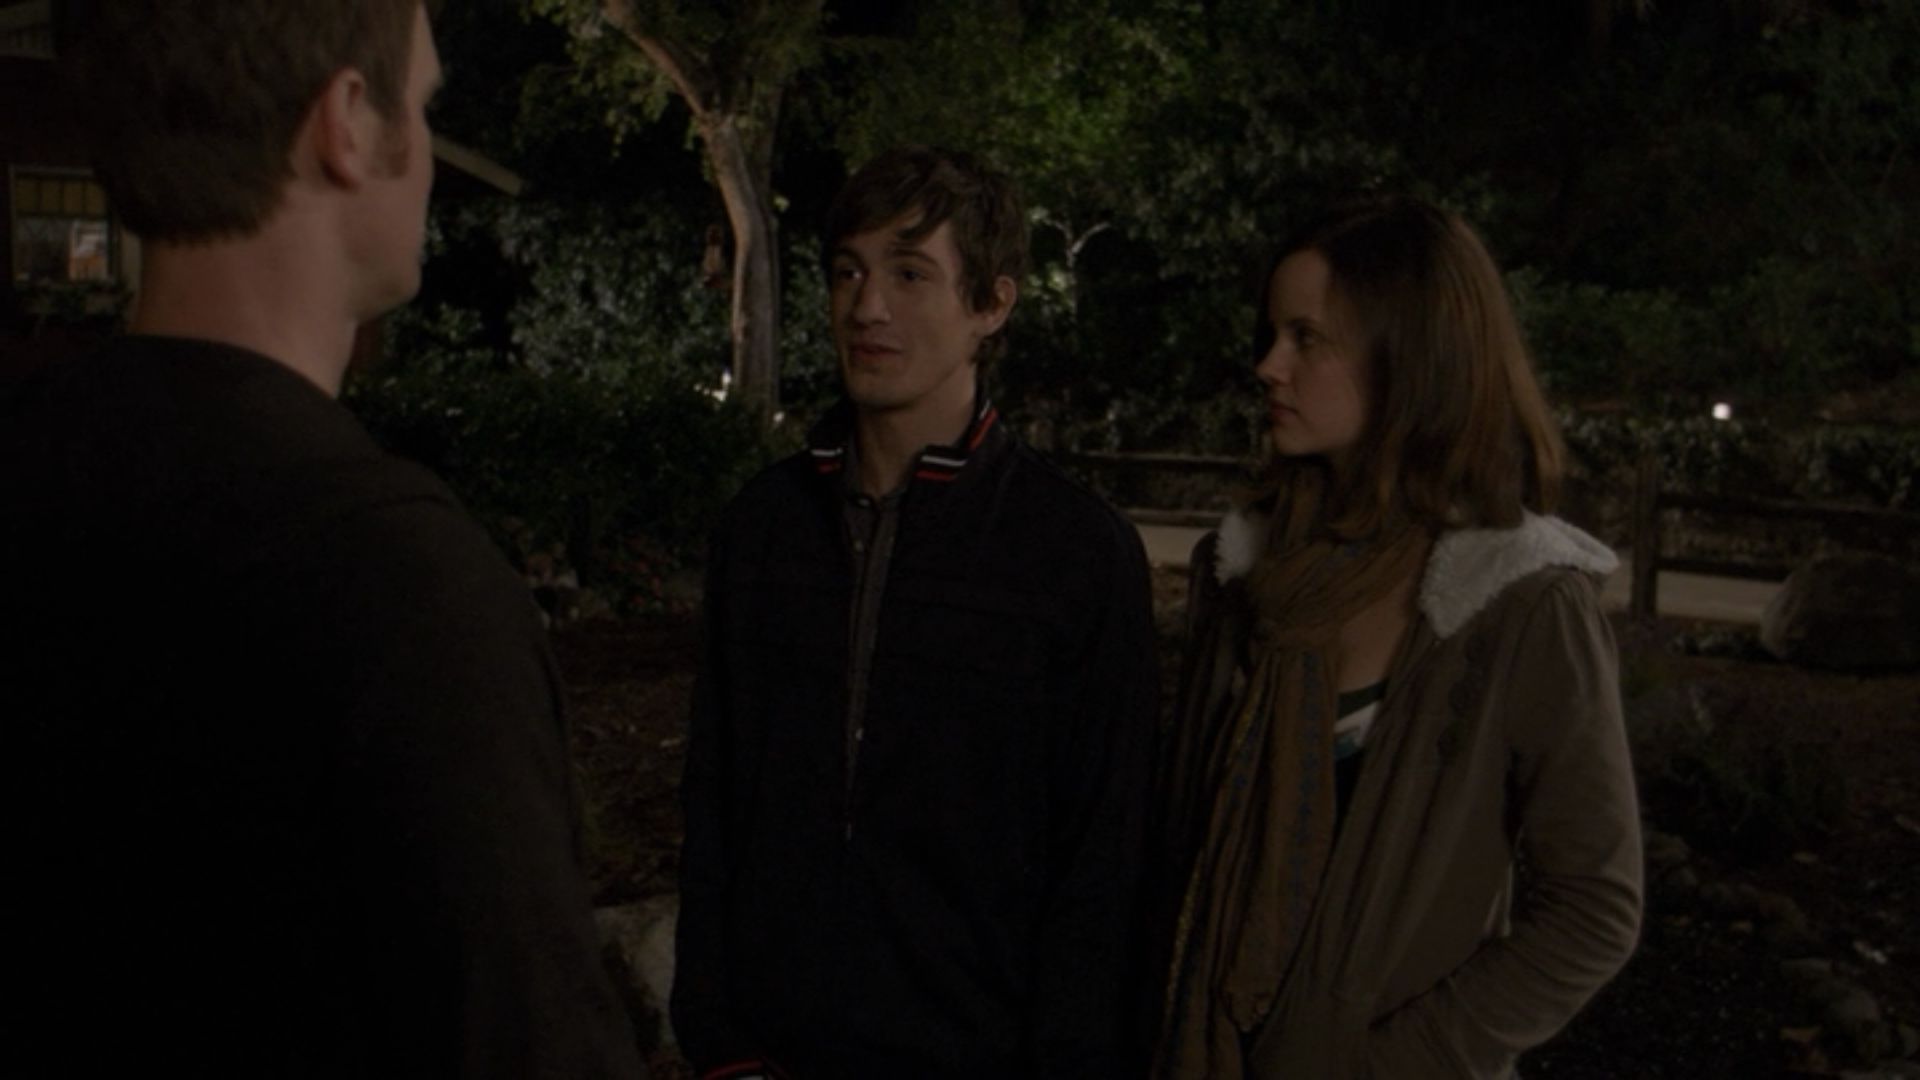 Asher Book in Parenthood, episode: Whassup